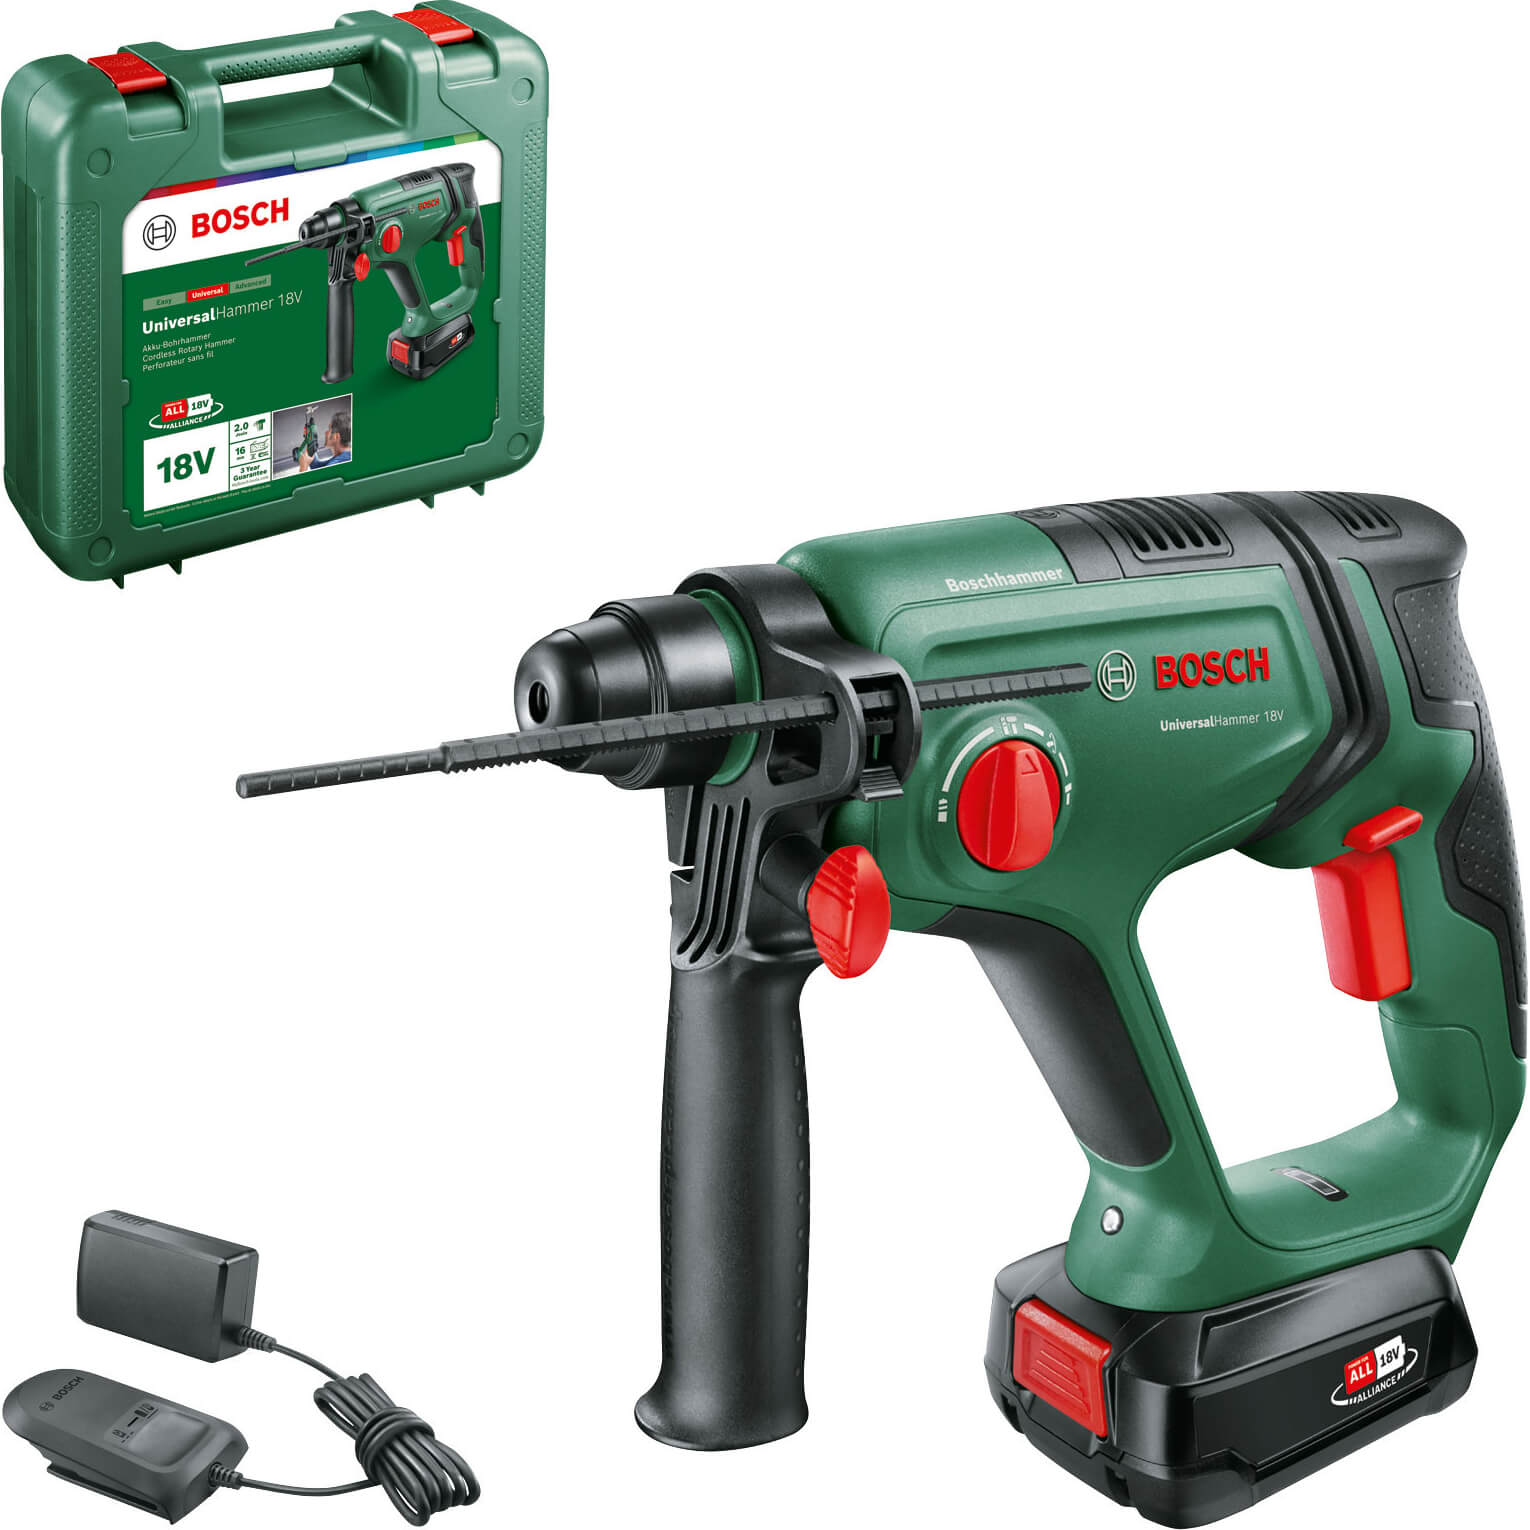 Image of Bosch UNIVERSALHAMMER 18v Cordless SDS Drill 1 x 2.5ah Li-ion Charger Case